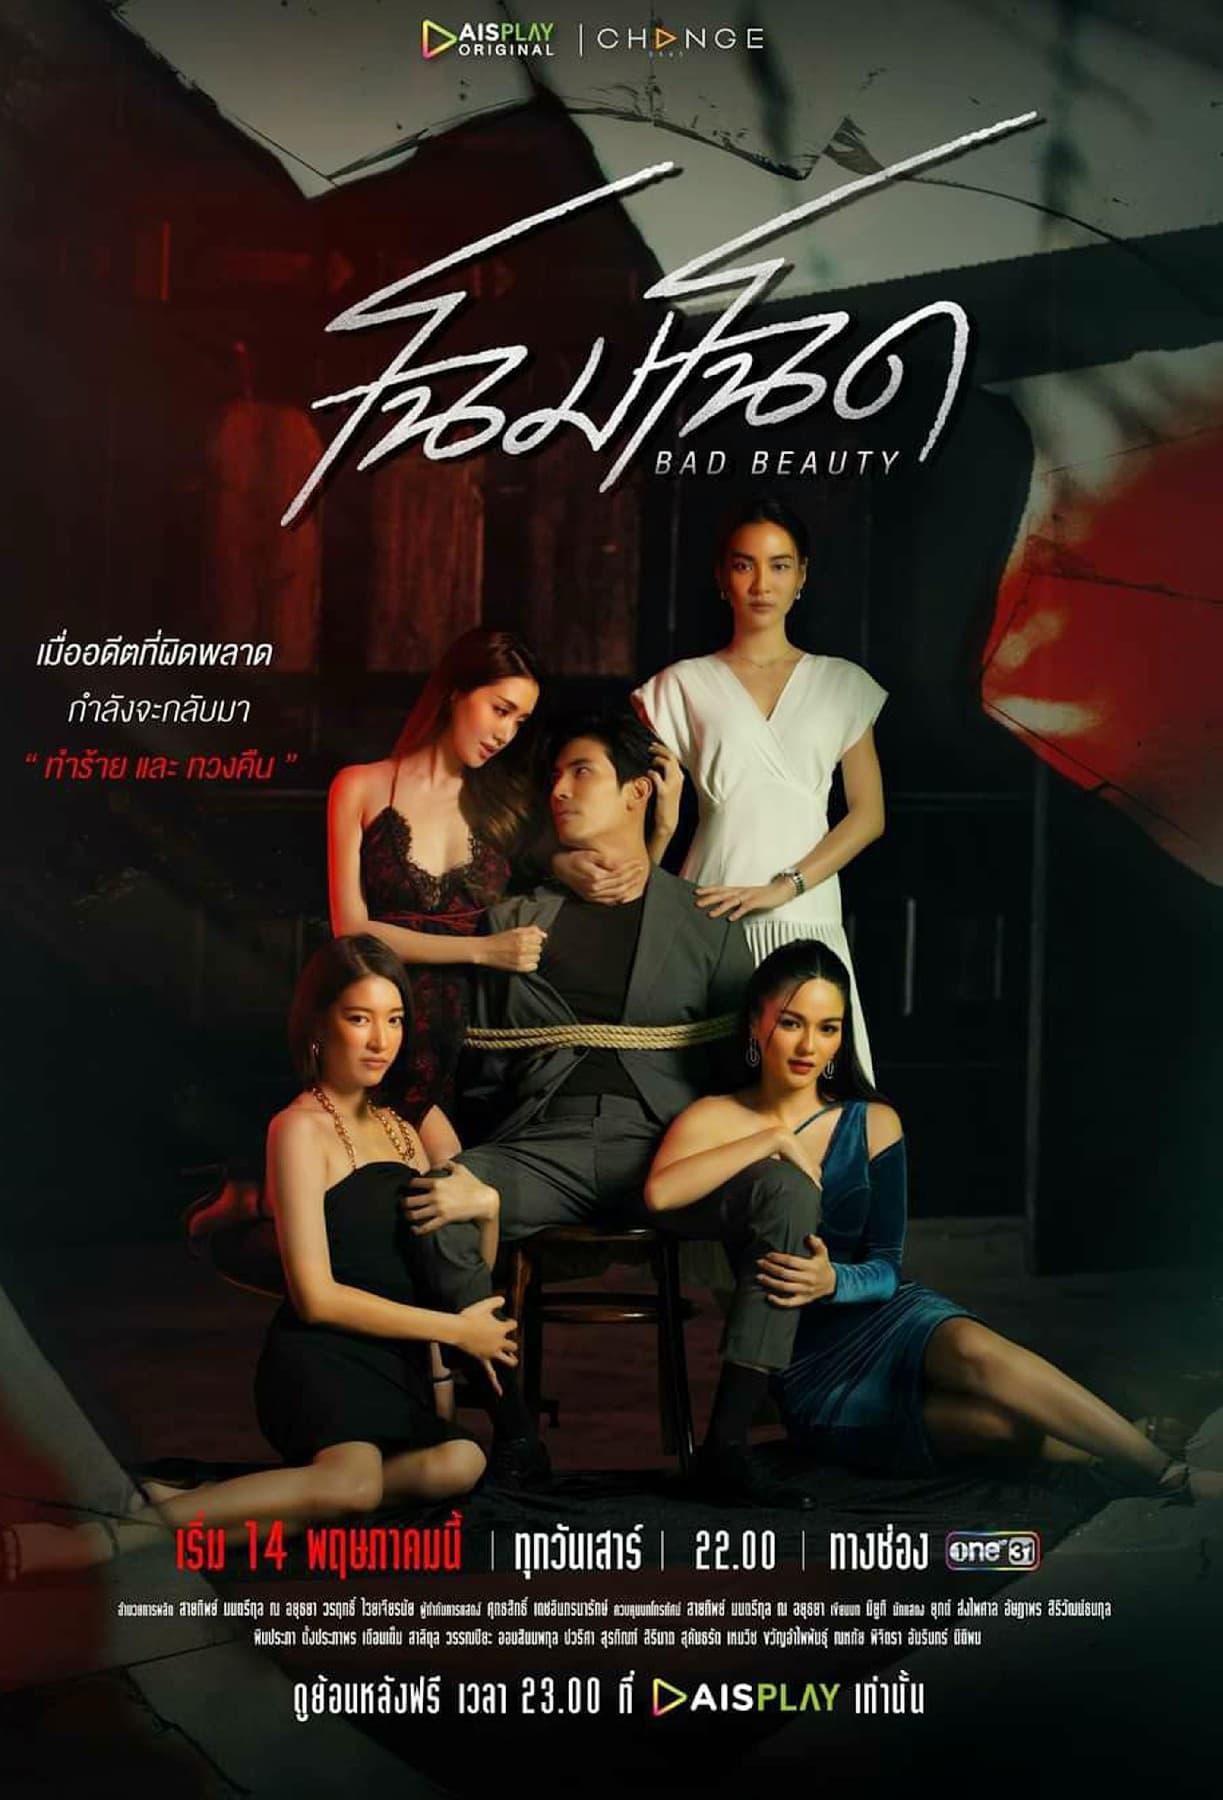 TV ratings for Bad Beauty (โฉมโฉด) in Tailandia. GMM One TV series